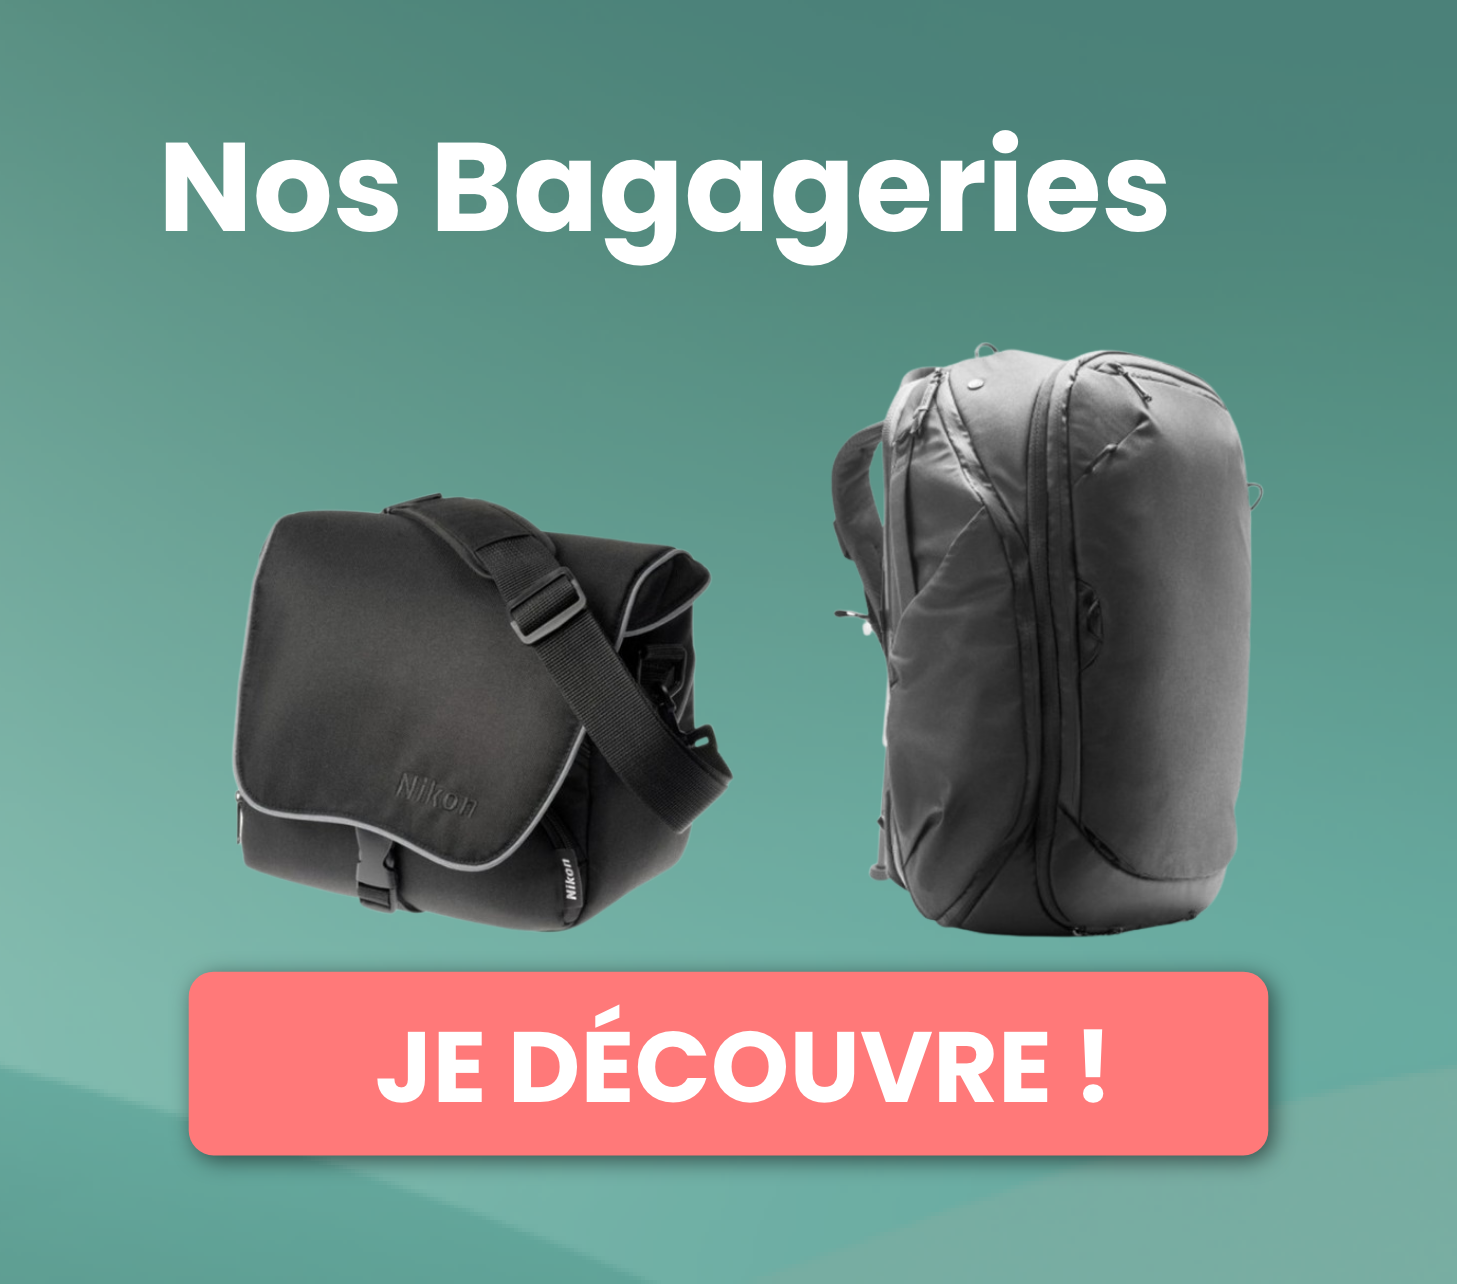 3-Nos bagageries